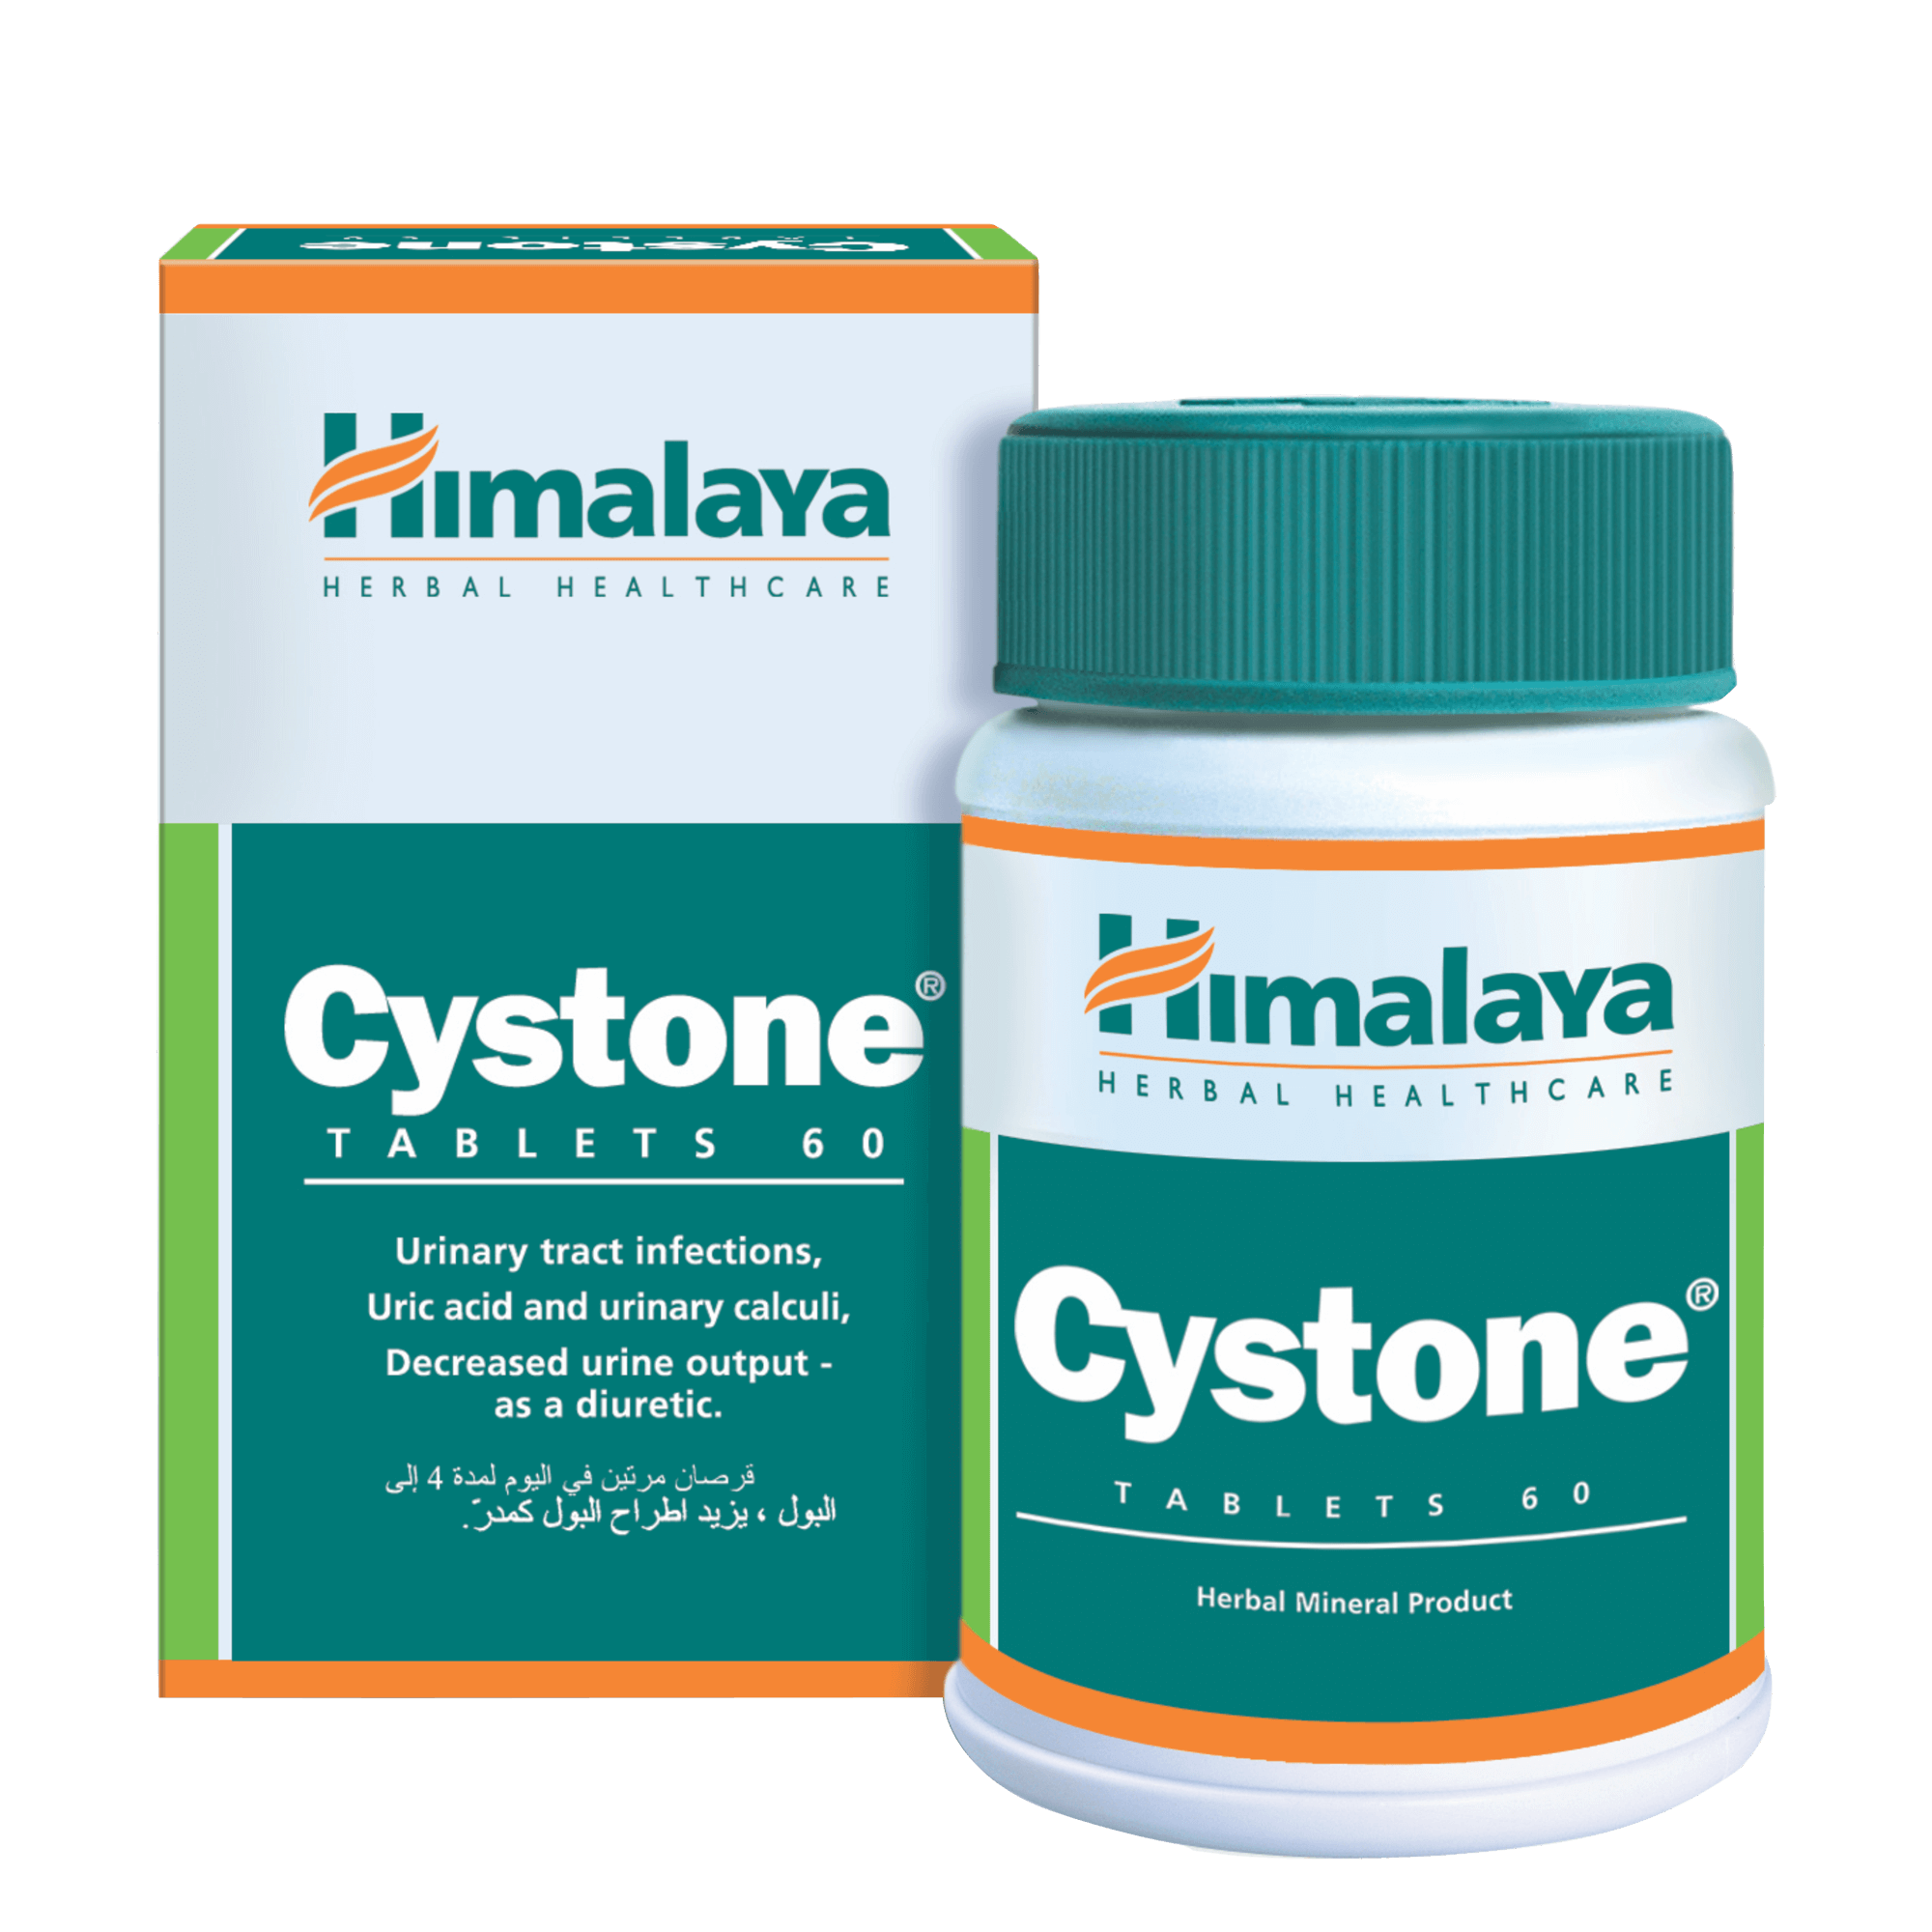 Himalaya Cystone Tablets - Tablets to manage kidney stones